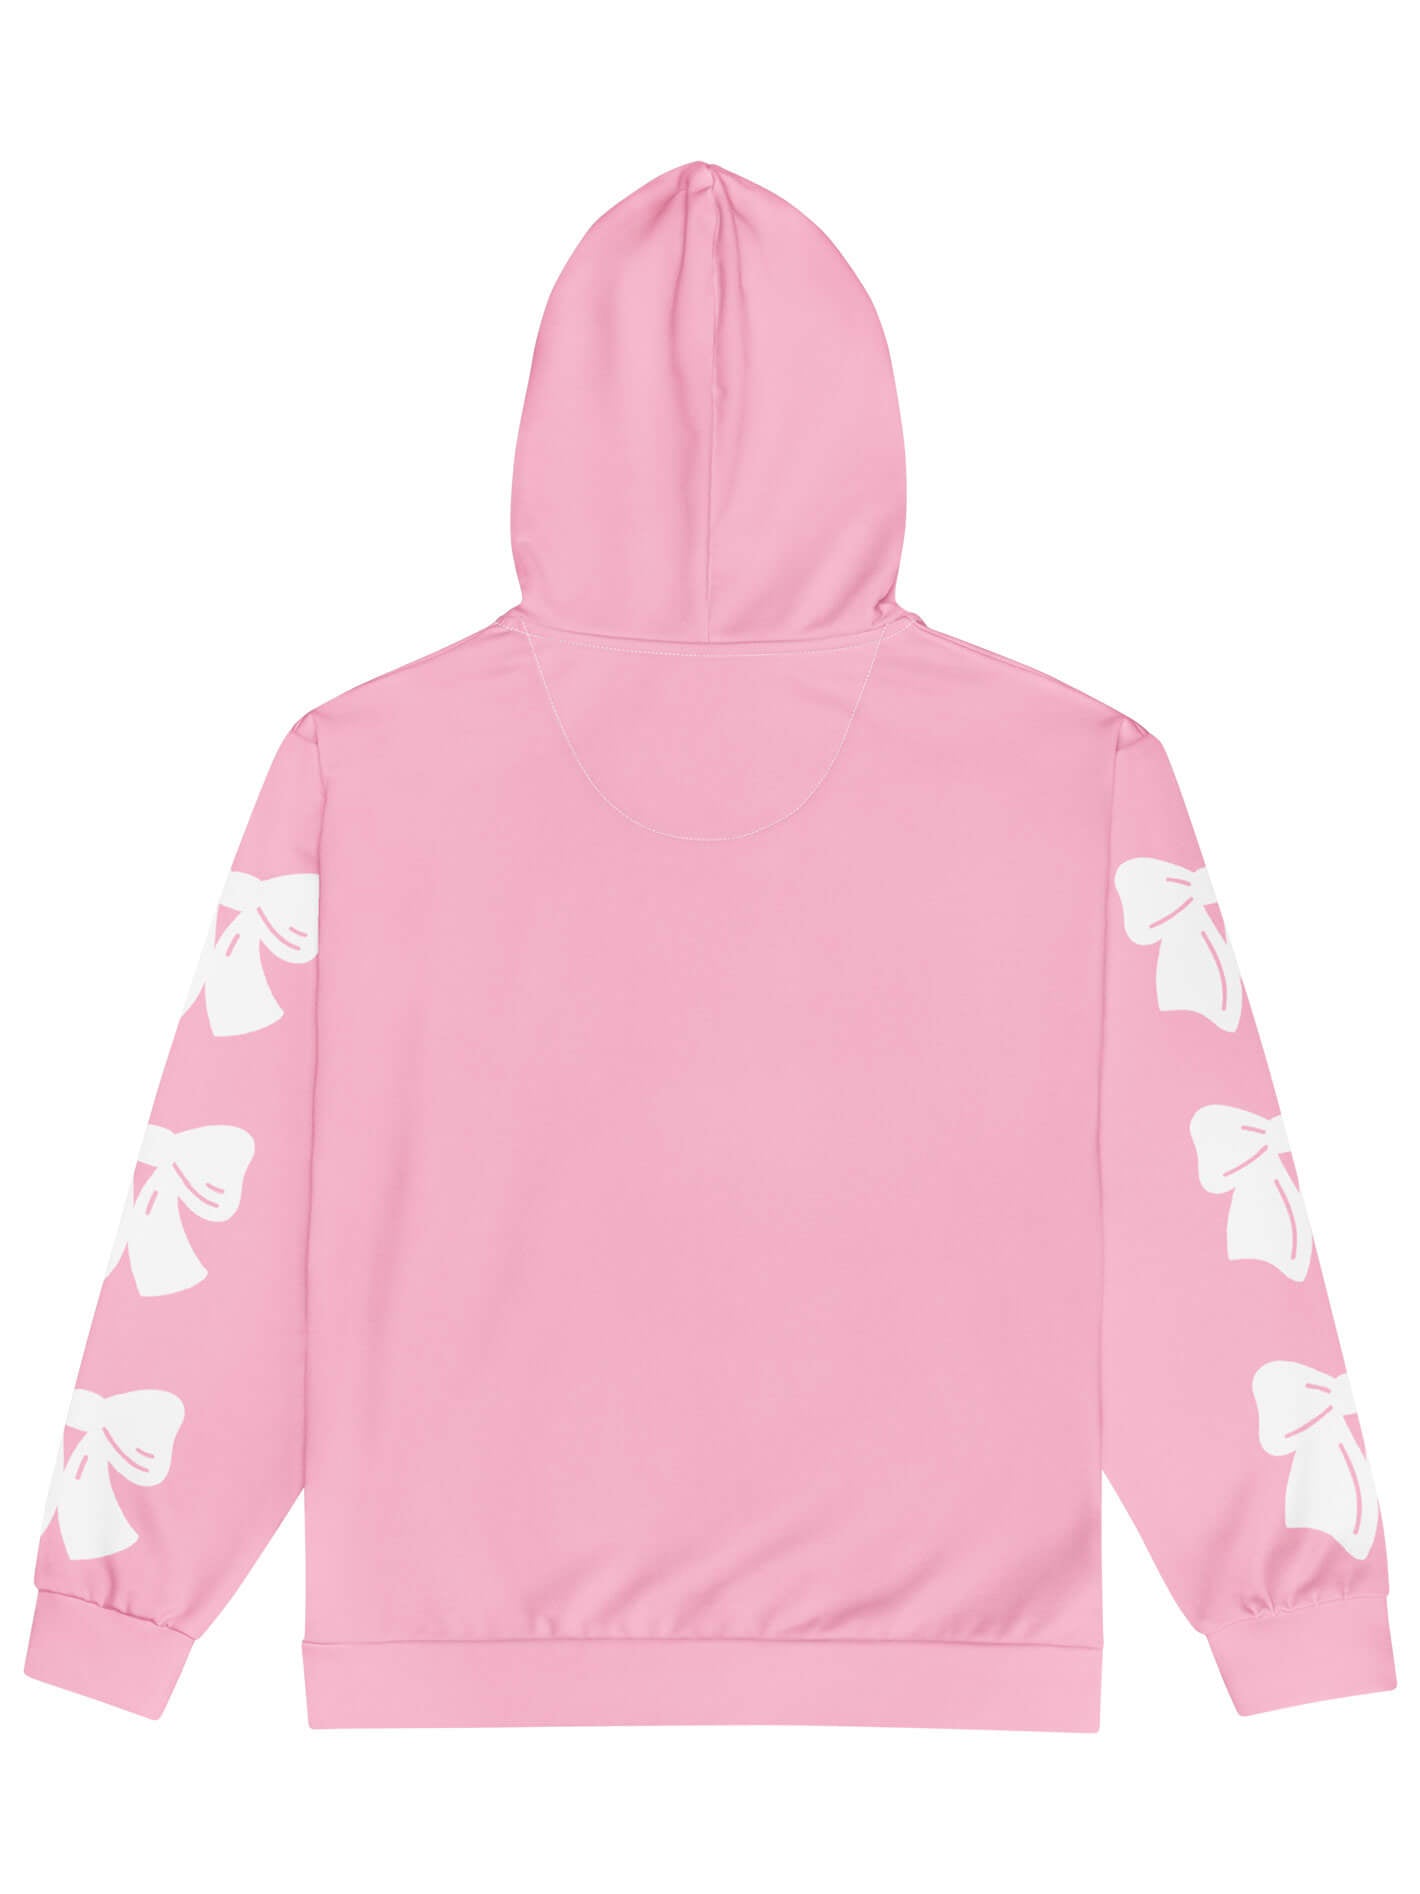 Plus size coquette pink hoodie.